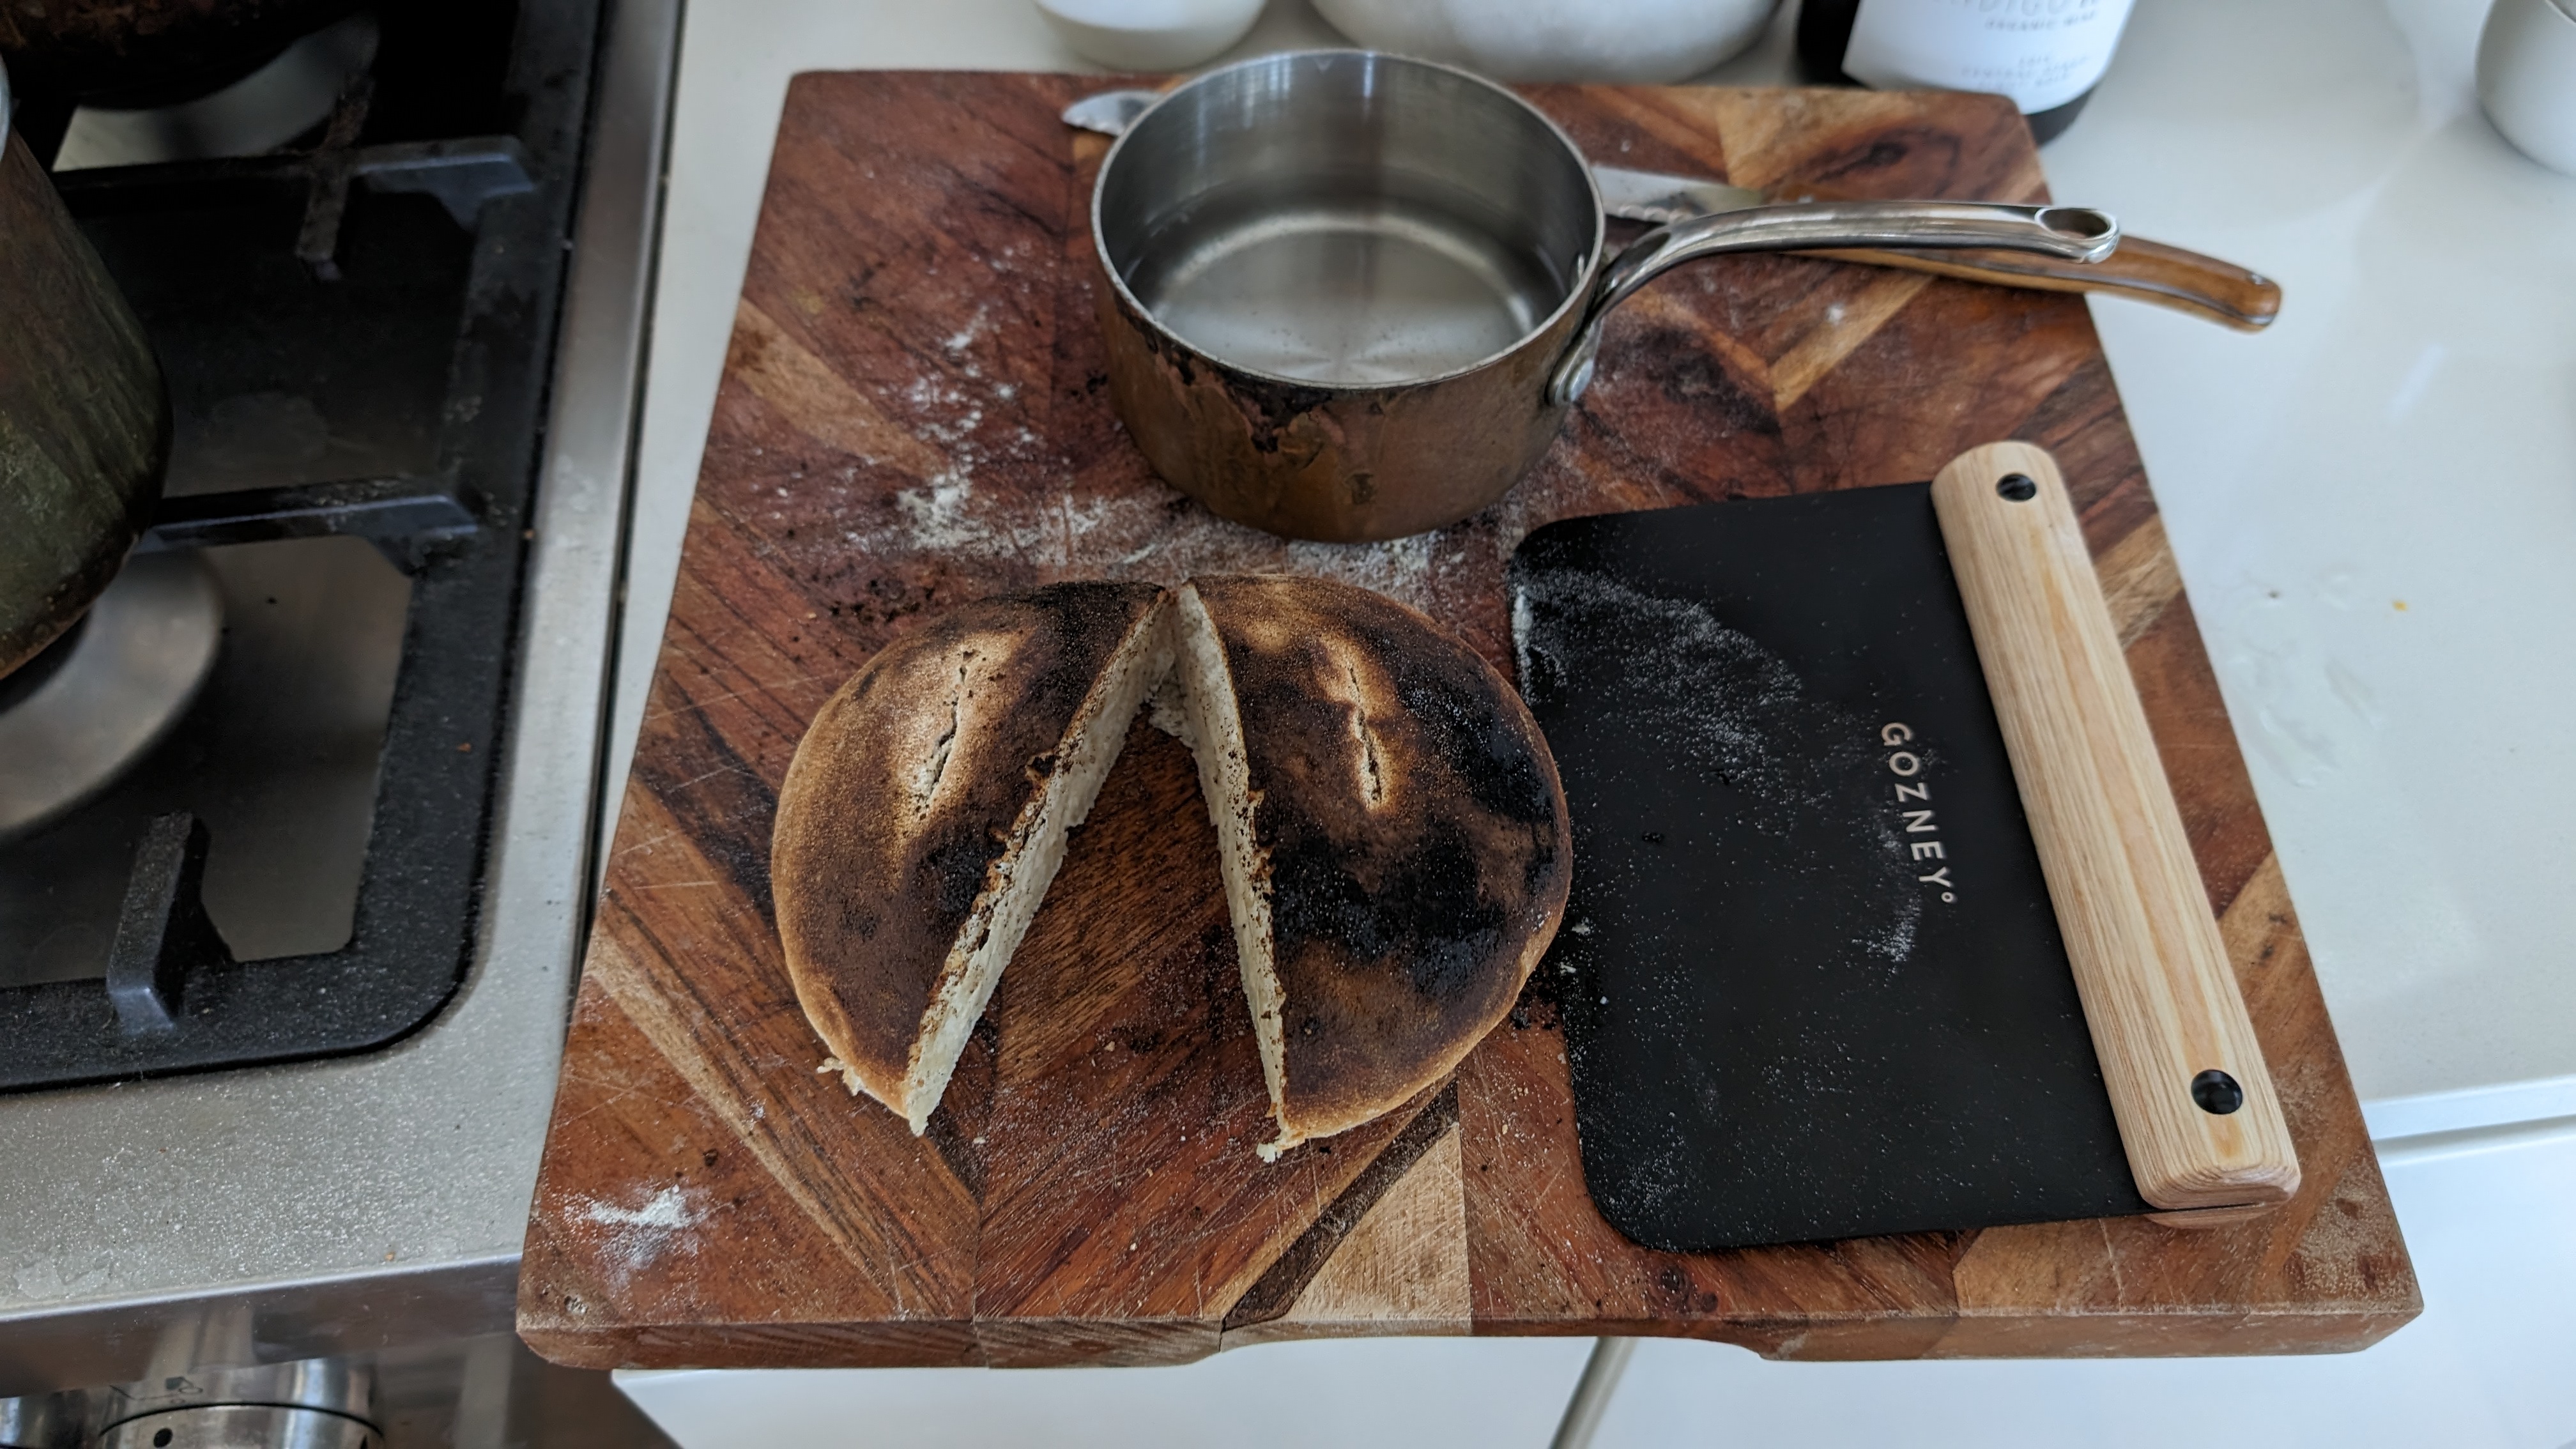 Making pizza and bread on the Roccbox